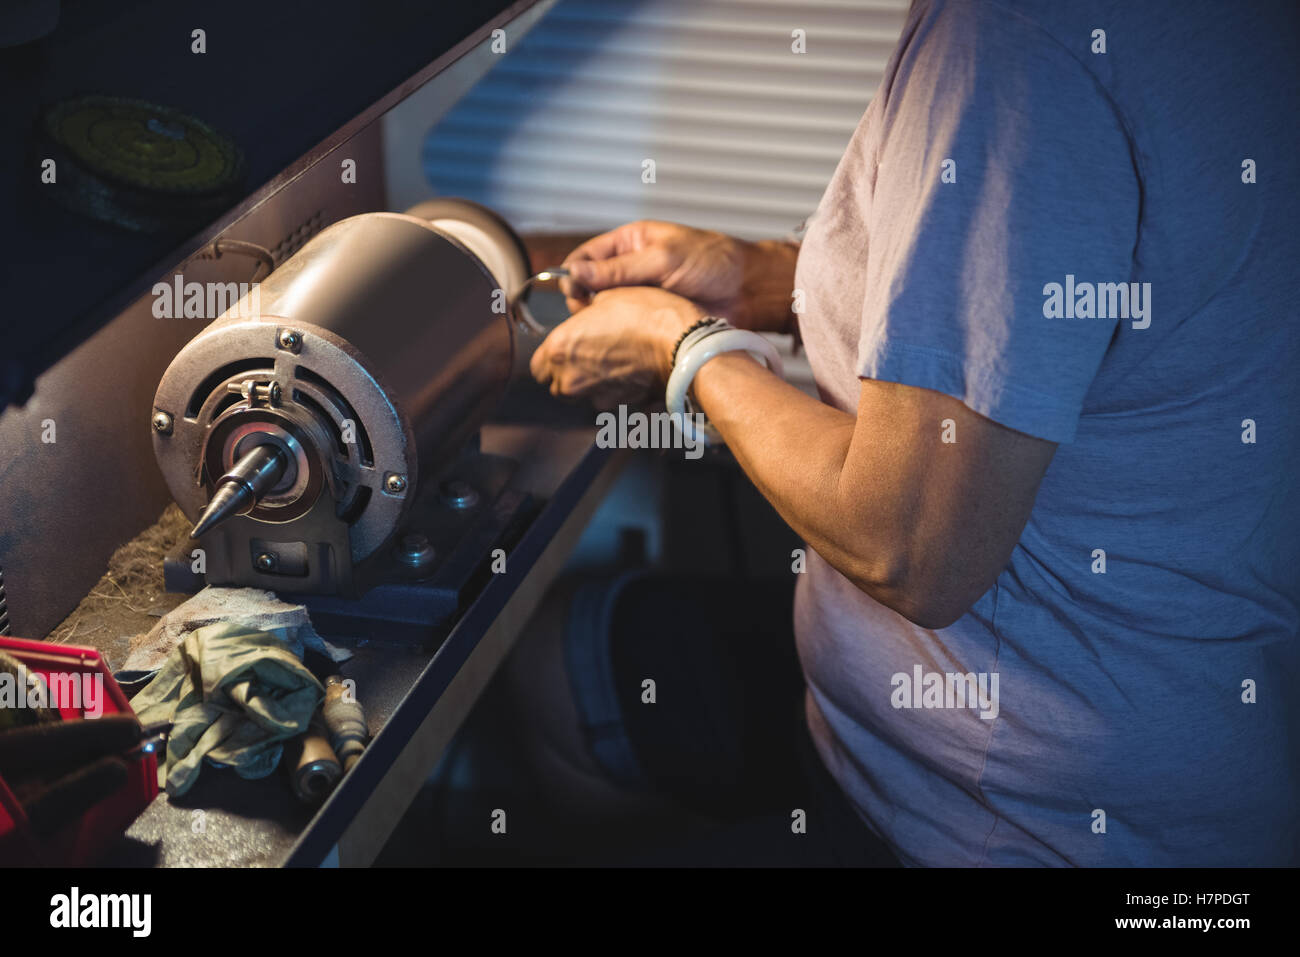 Mid-section of craftswoman working on a machine Stock Photo